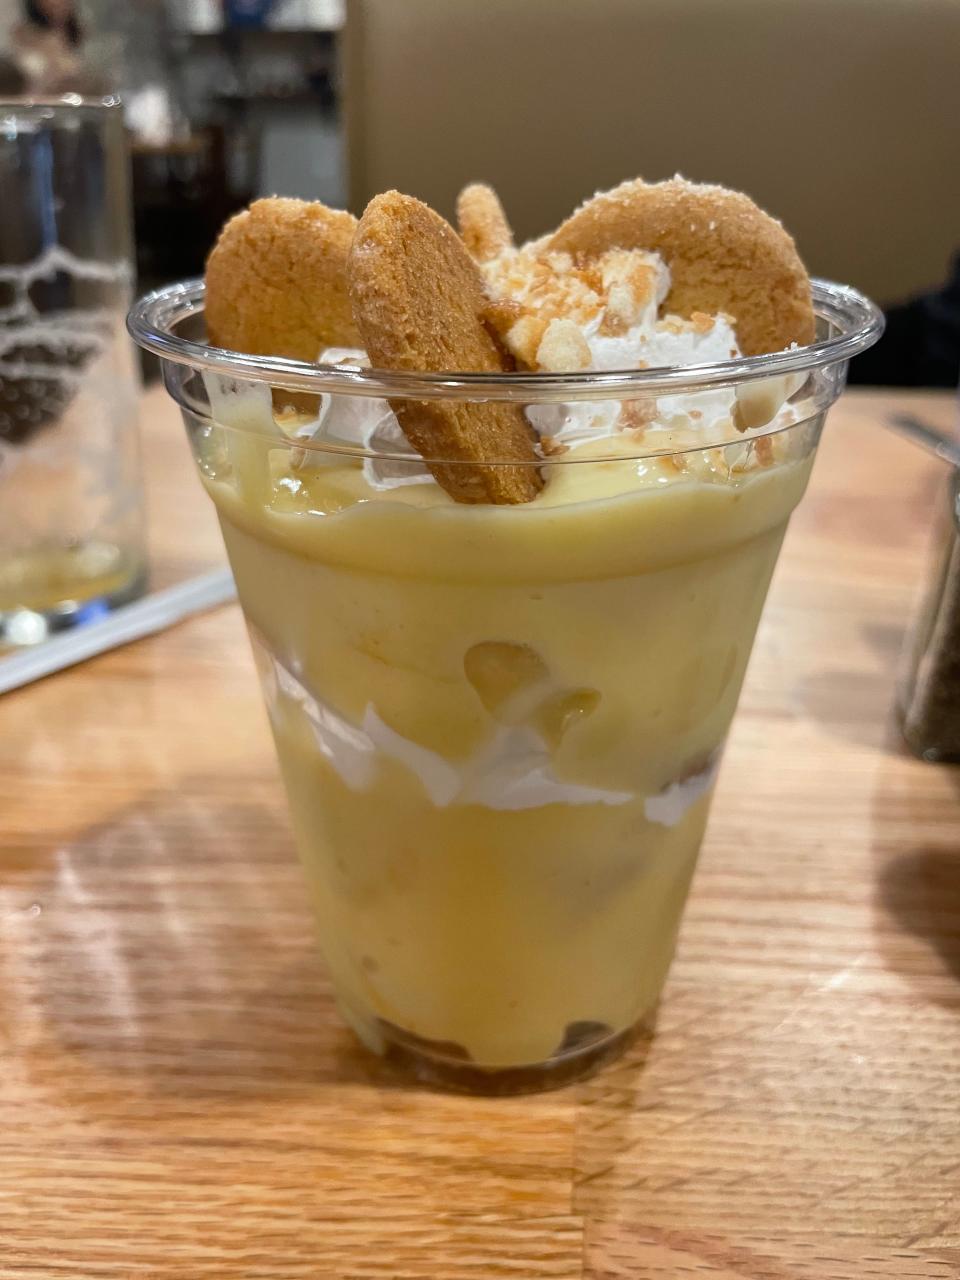 Banana pudding is one of the dessert options at Trotter’s Whole Hog BBQ in Sevierville.